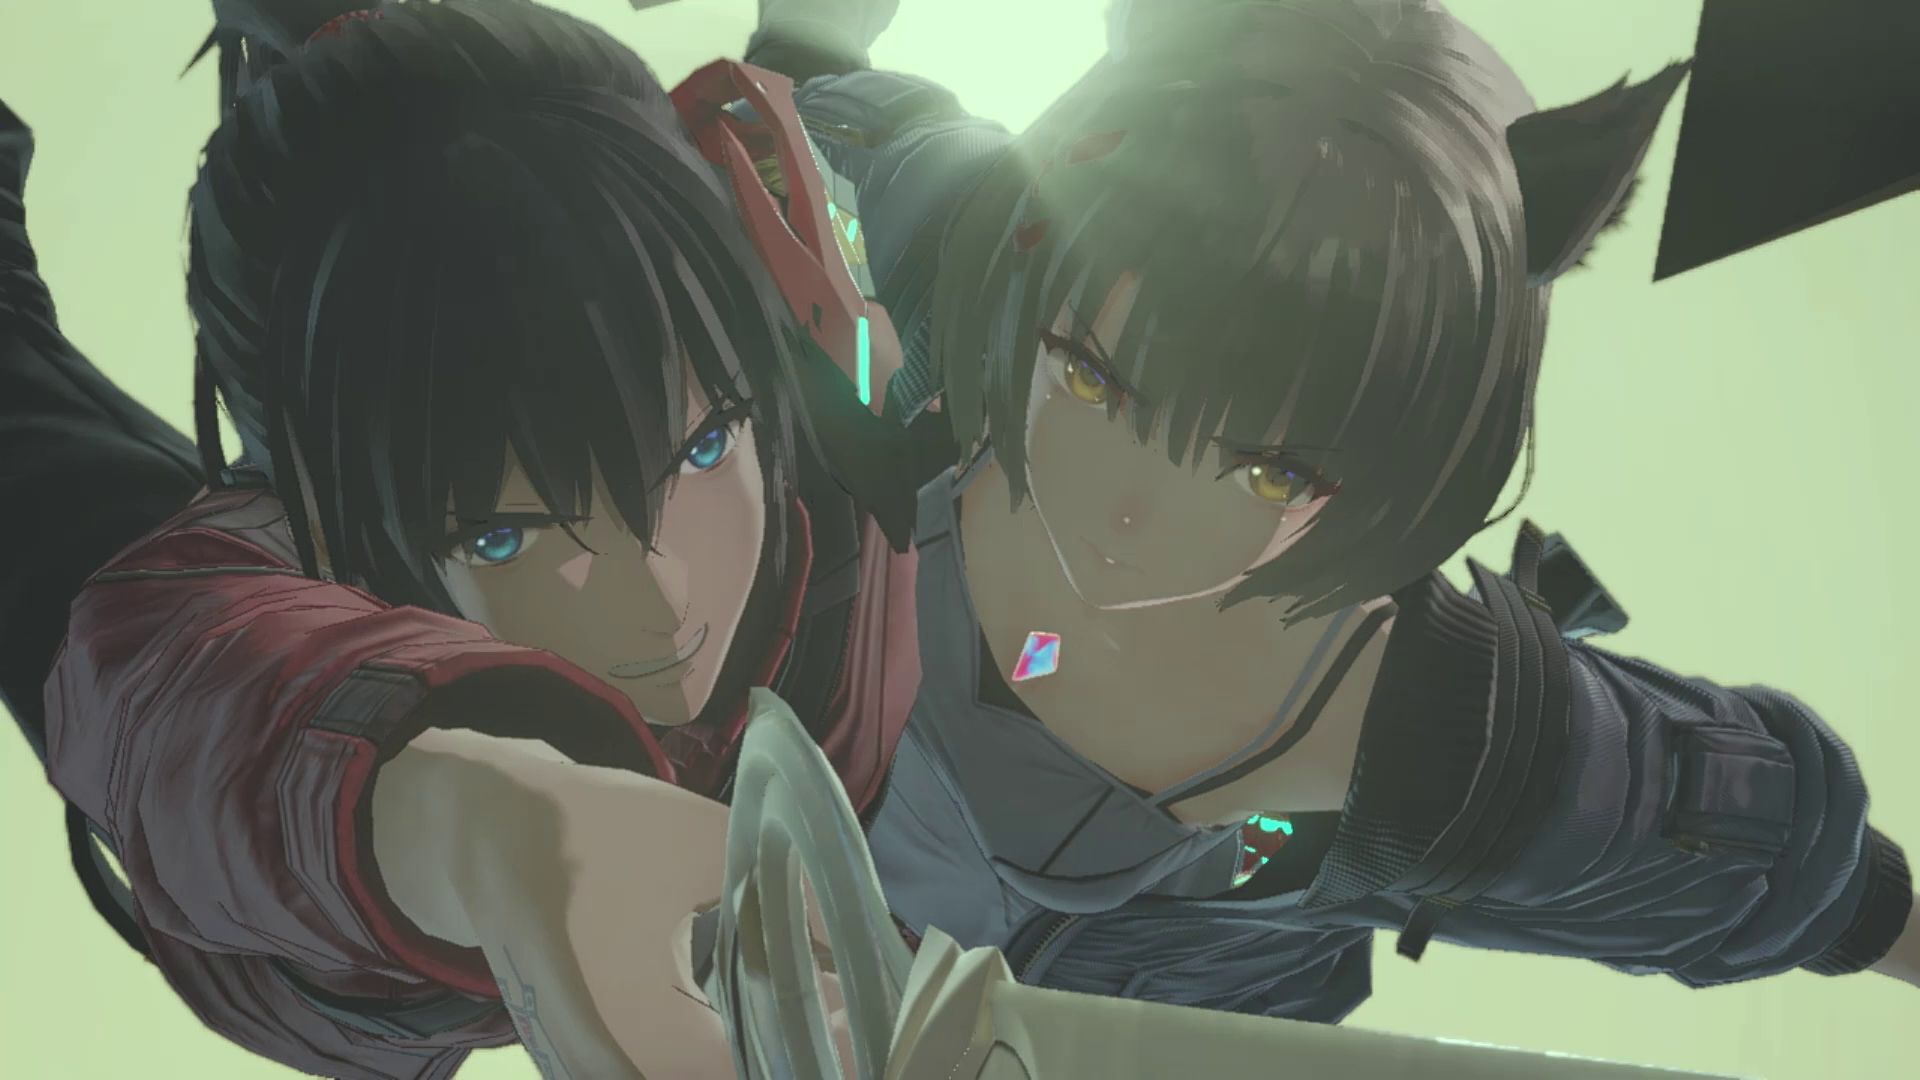 Check out the latest news about Xenoblade Chronicles 3!, News & Updates